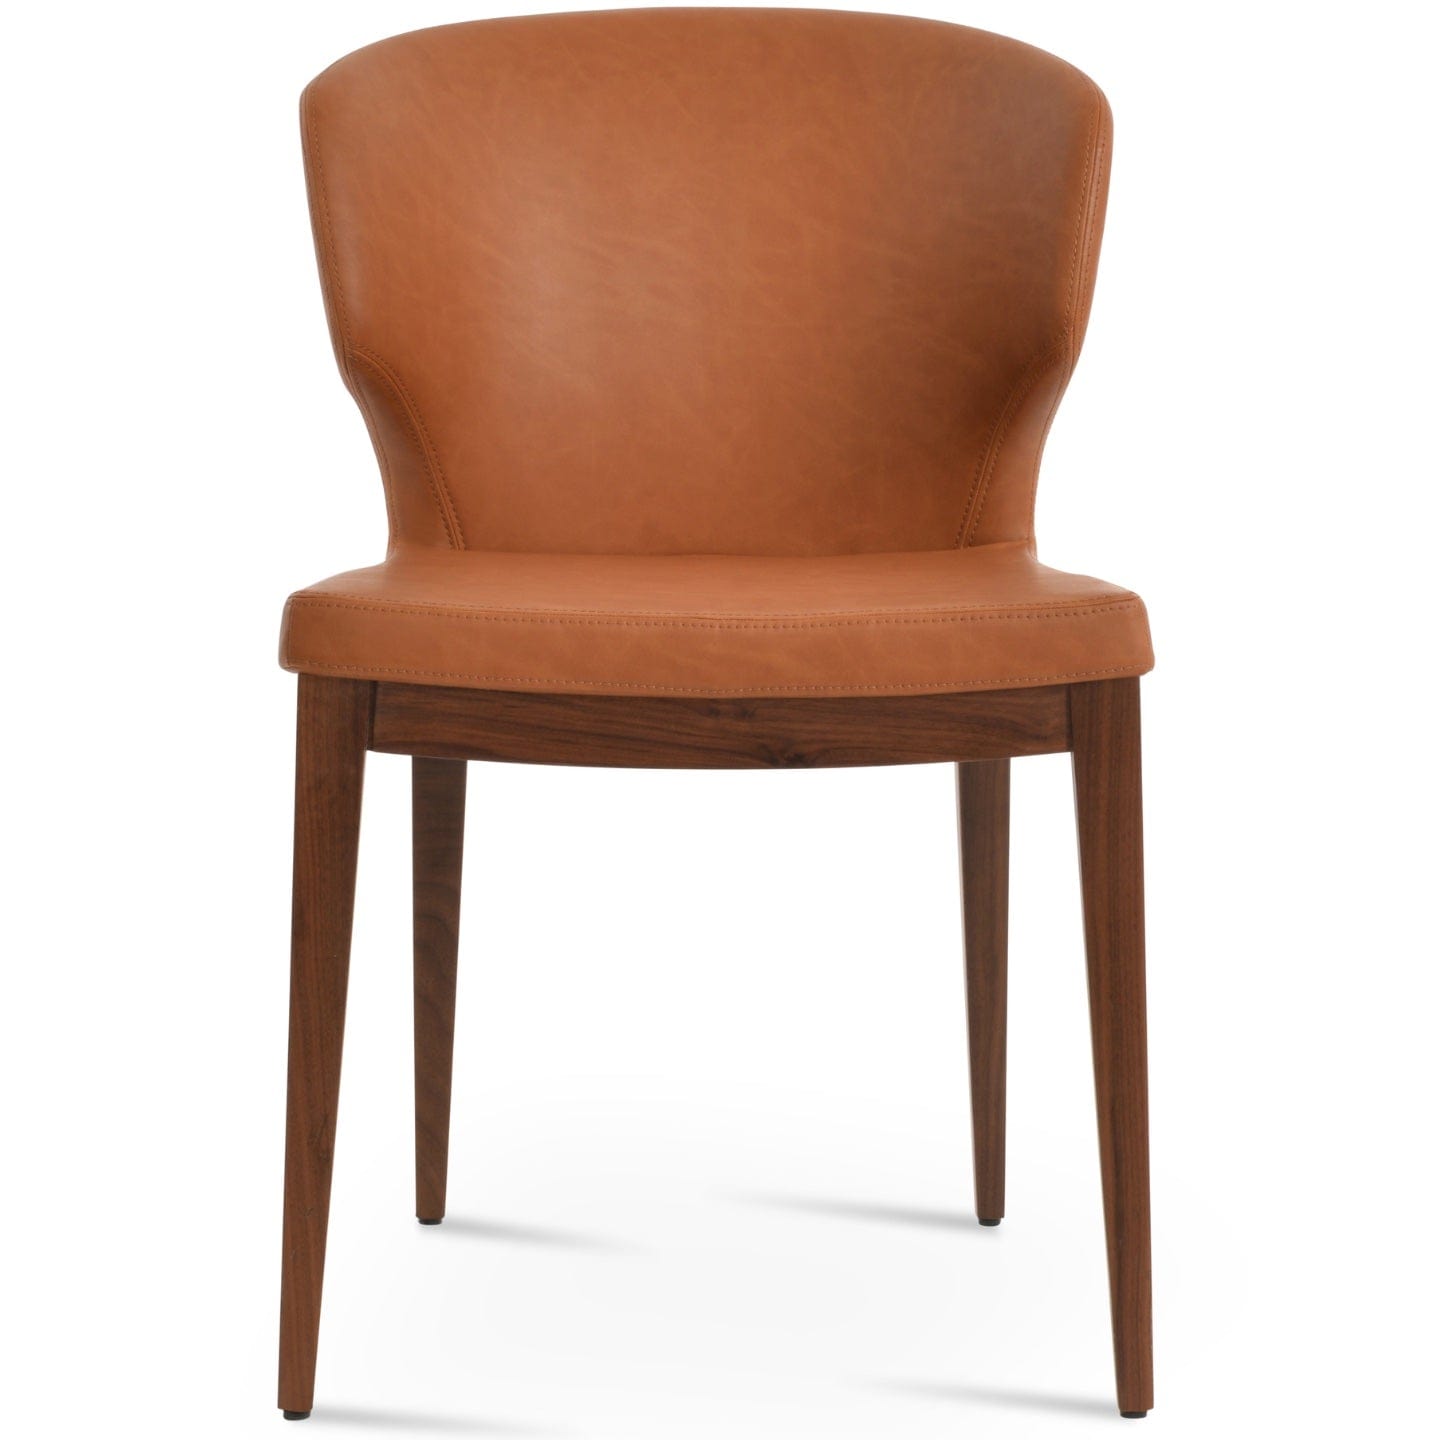 sohoConcept Kitchen & Dining Room Chairs Amed Wood PLUS Chairs | Leather Wooden Dining Chairs